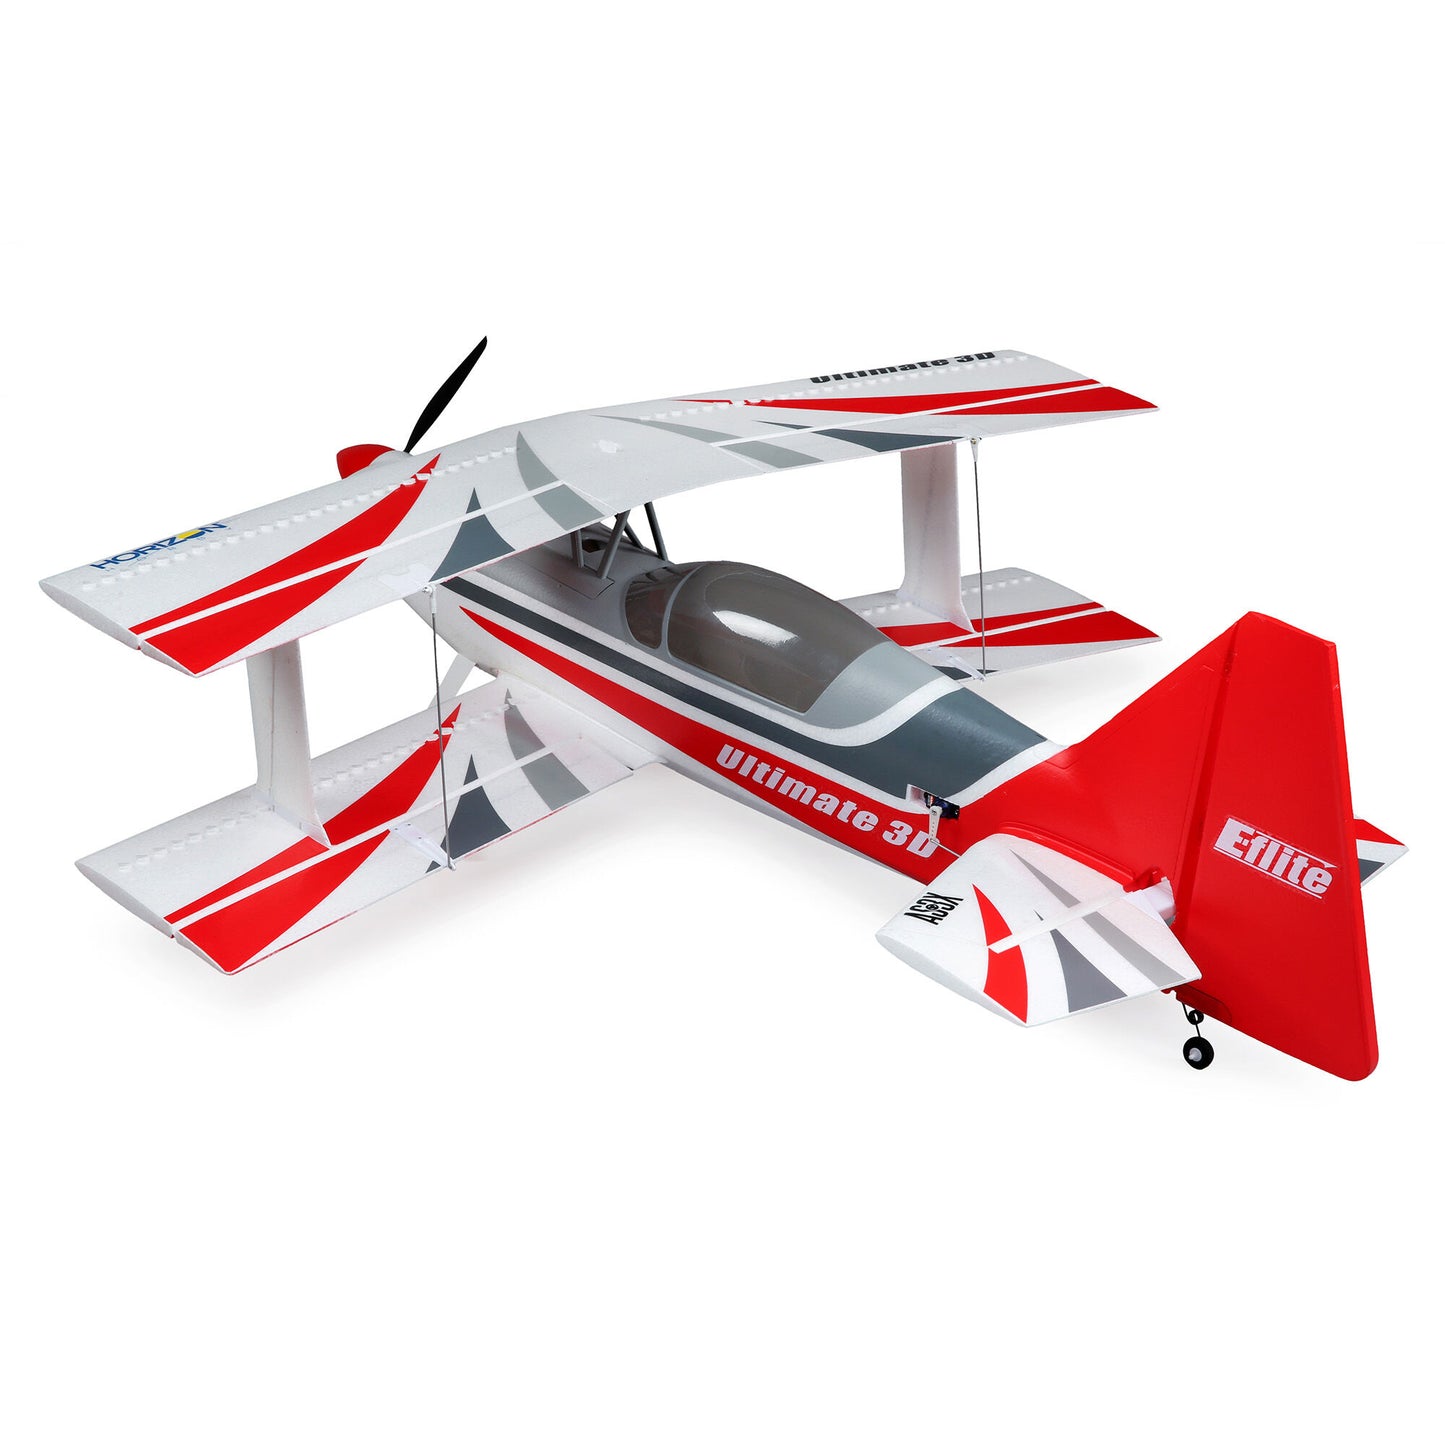 E-Flite Ultimate 3D 950mm Smart BNF Basic with AS3X & SAFE